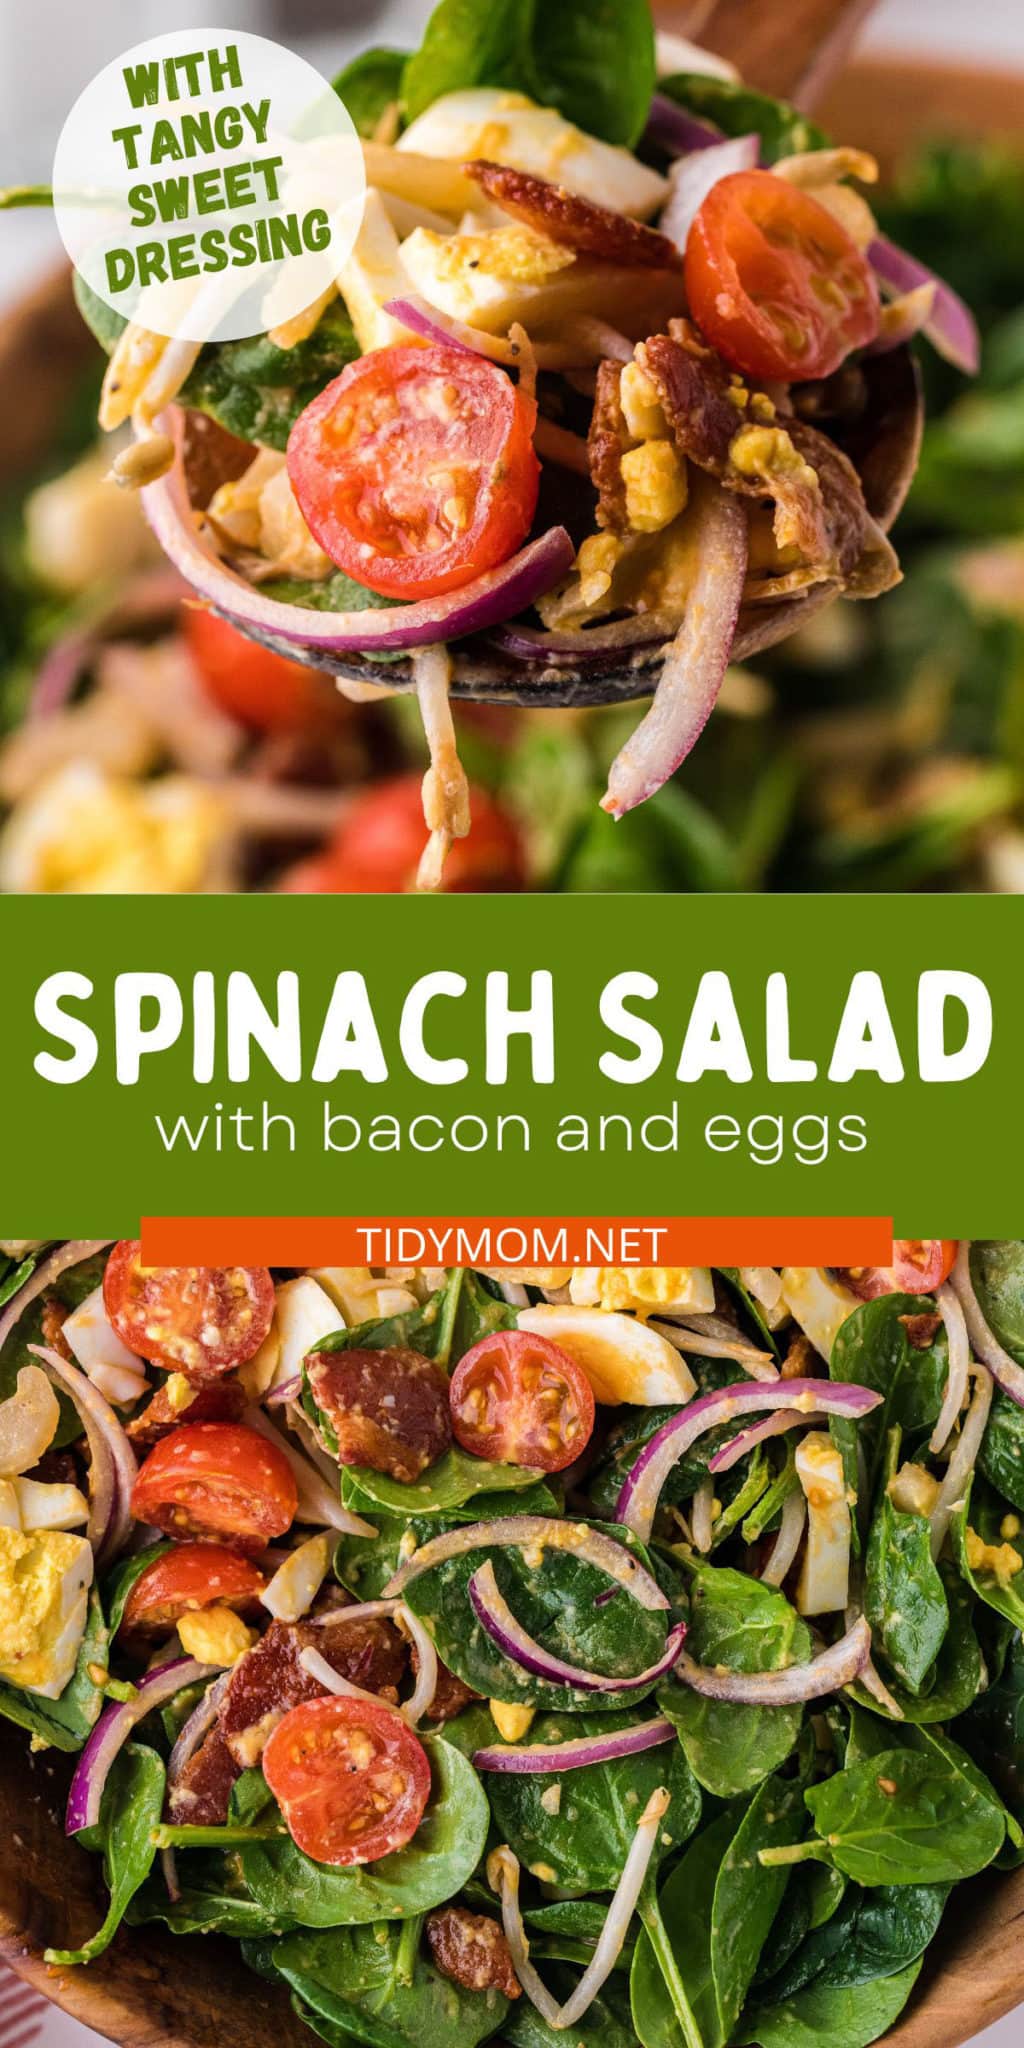 Insanely Good Spinach Salad With Bacon and Eggs - TidyMom®